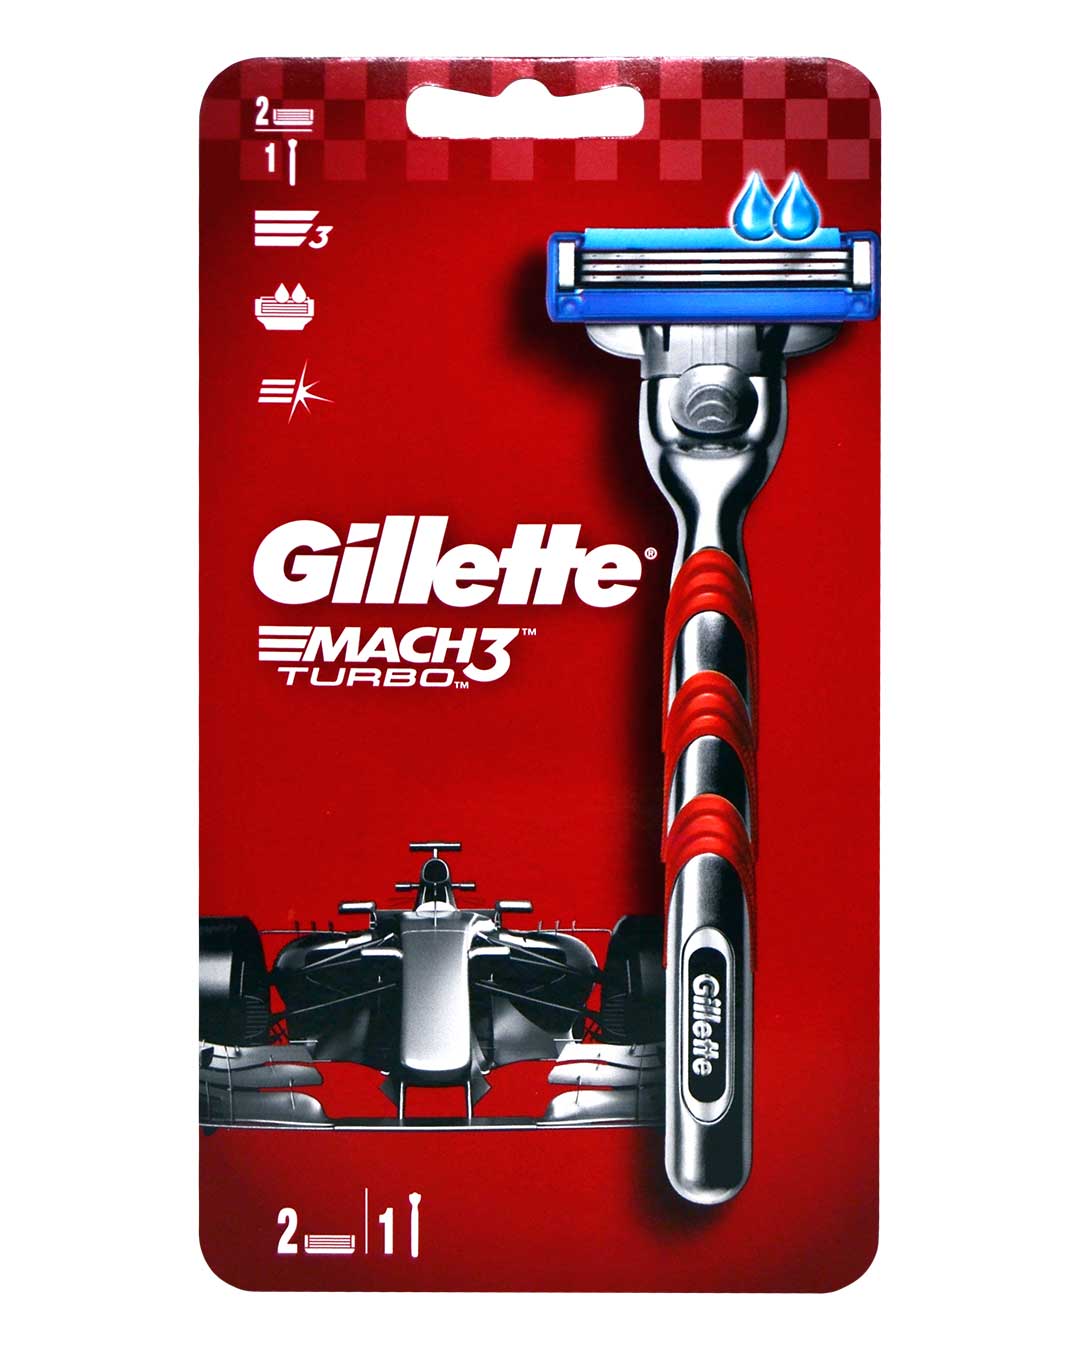 Gillette MACH3 TURBO 2 UP RED EDITION | FmcgStore.com